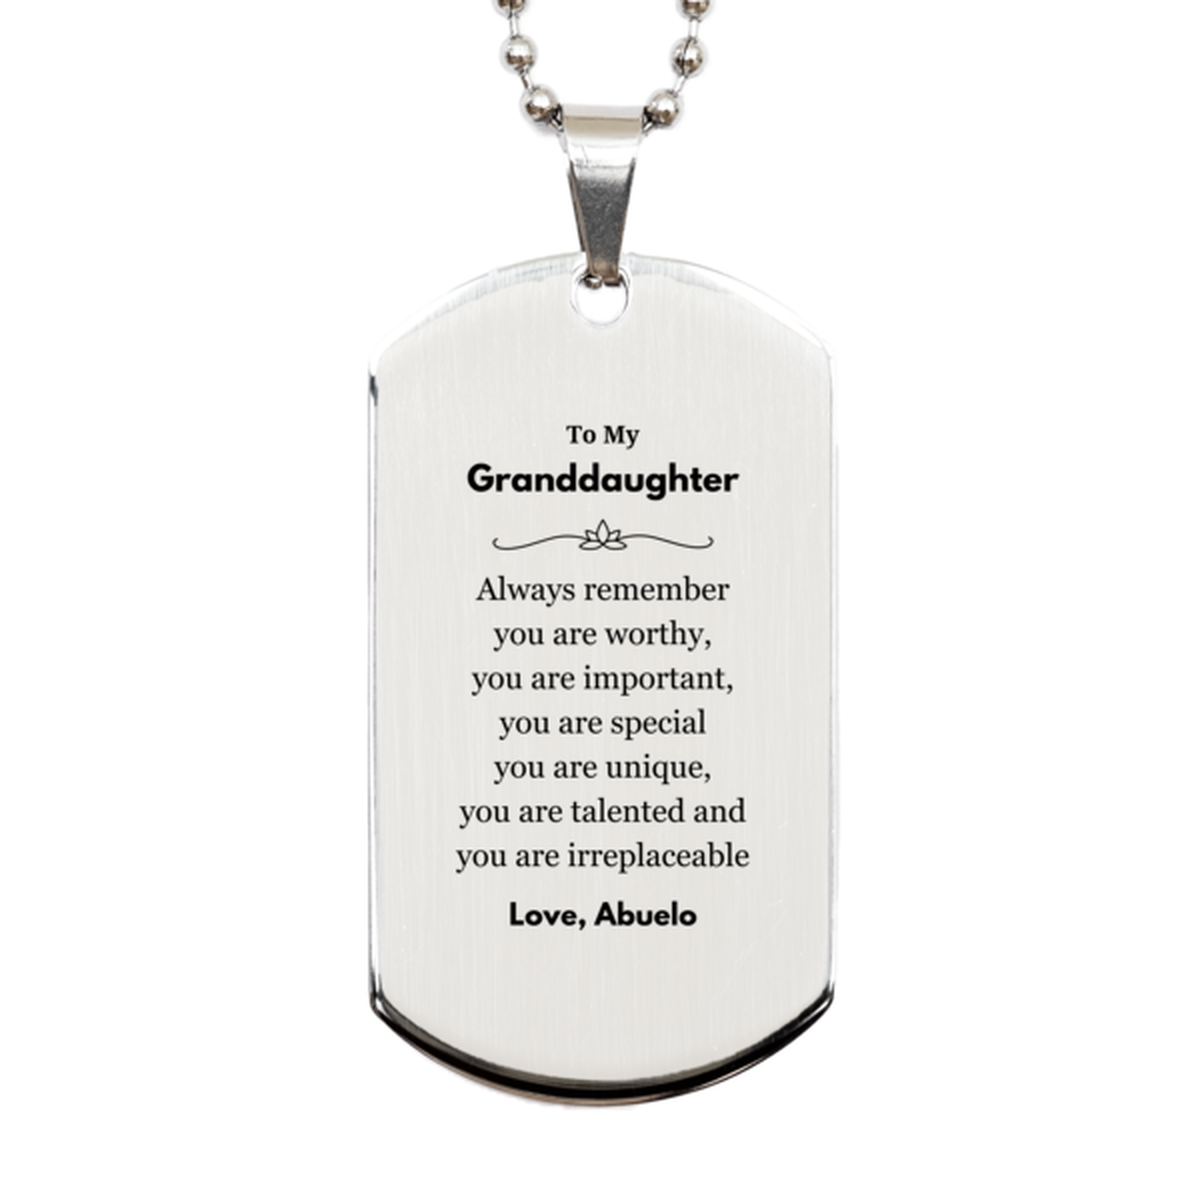 Granddaughter Birthday Gifts from Abuelo, Inspirational Silver Dog Tag for Granddaughter Christmas Graduation Gifts for Granddaughter Always remember you are worthy, you are important. Love, Abuelo